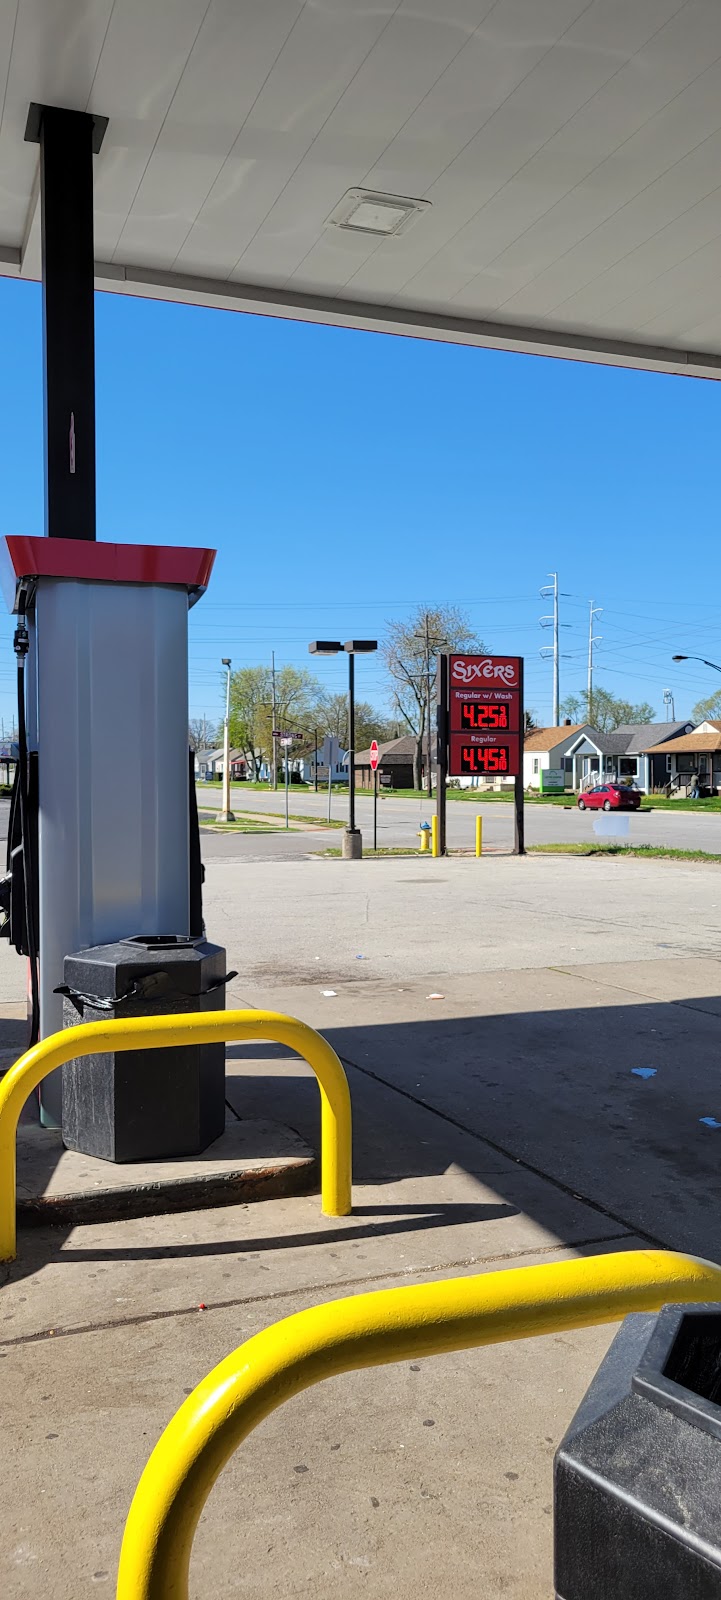 Sixers Gas Station | 8317 Kennedy Ave, Highland, IN 46322 | Phone: (219) 972-8317